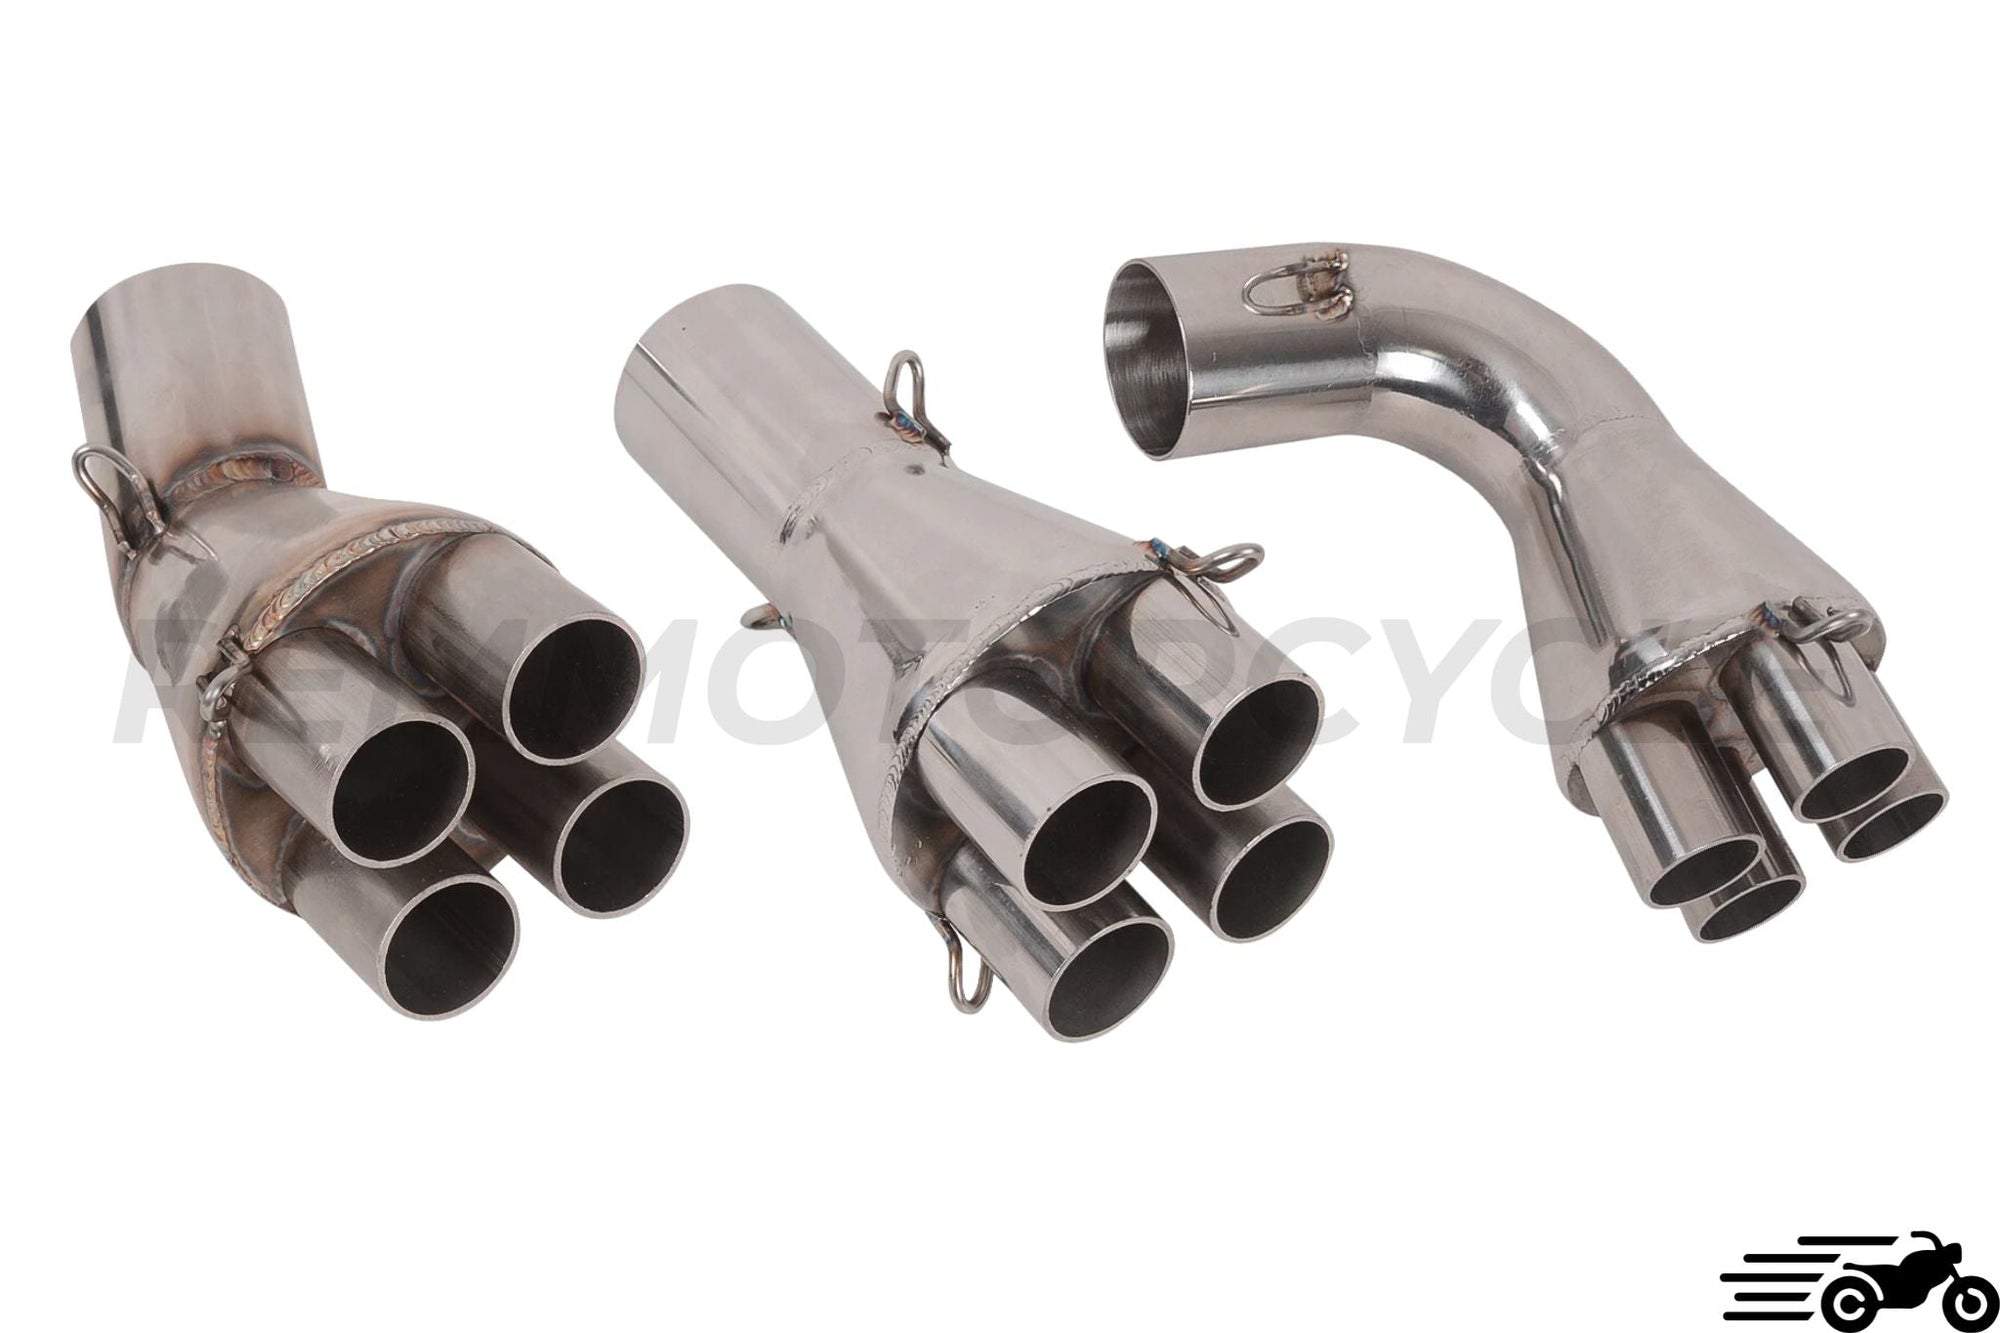 4 in 1 exhaust adapters for BMW K75 K100